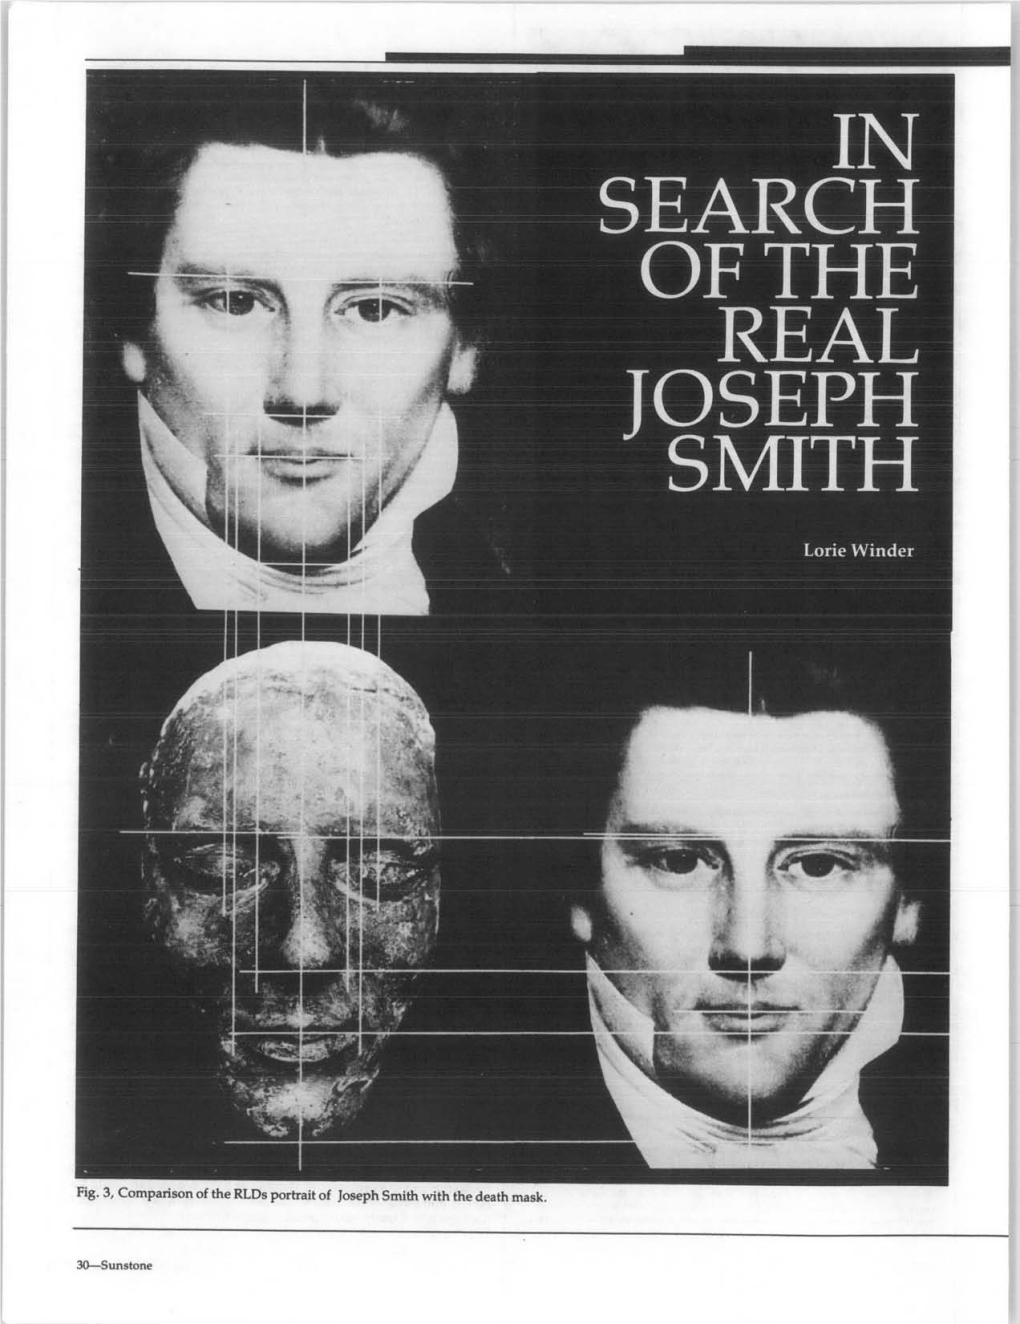 Rlds Portrait of Joseph Smith with the Death Mask